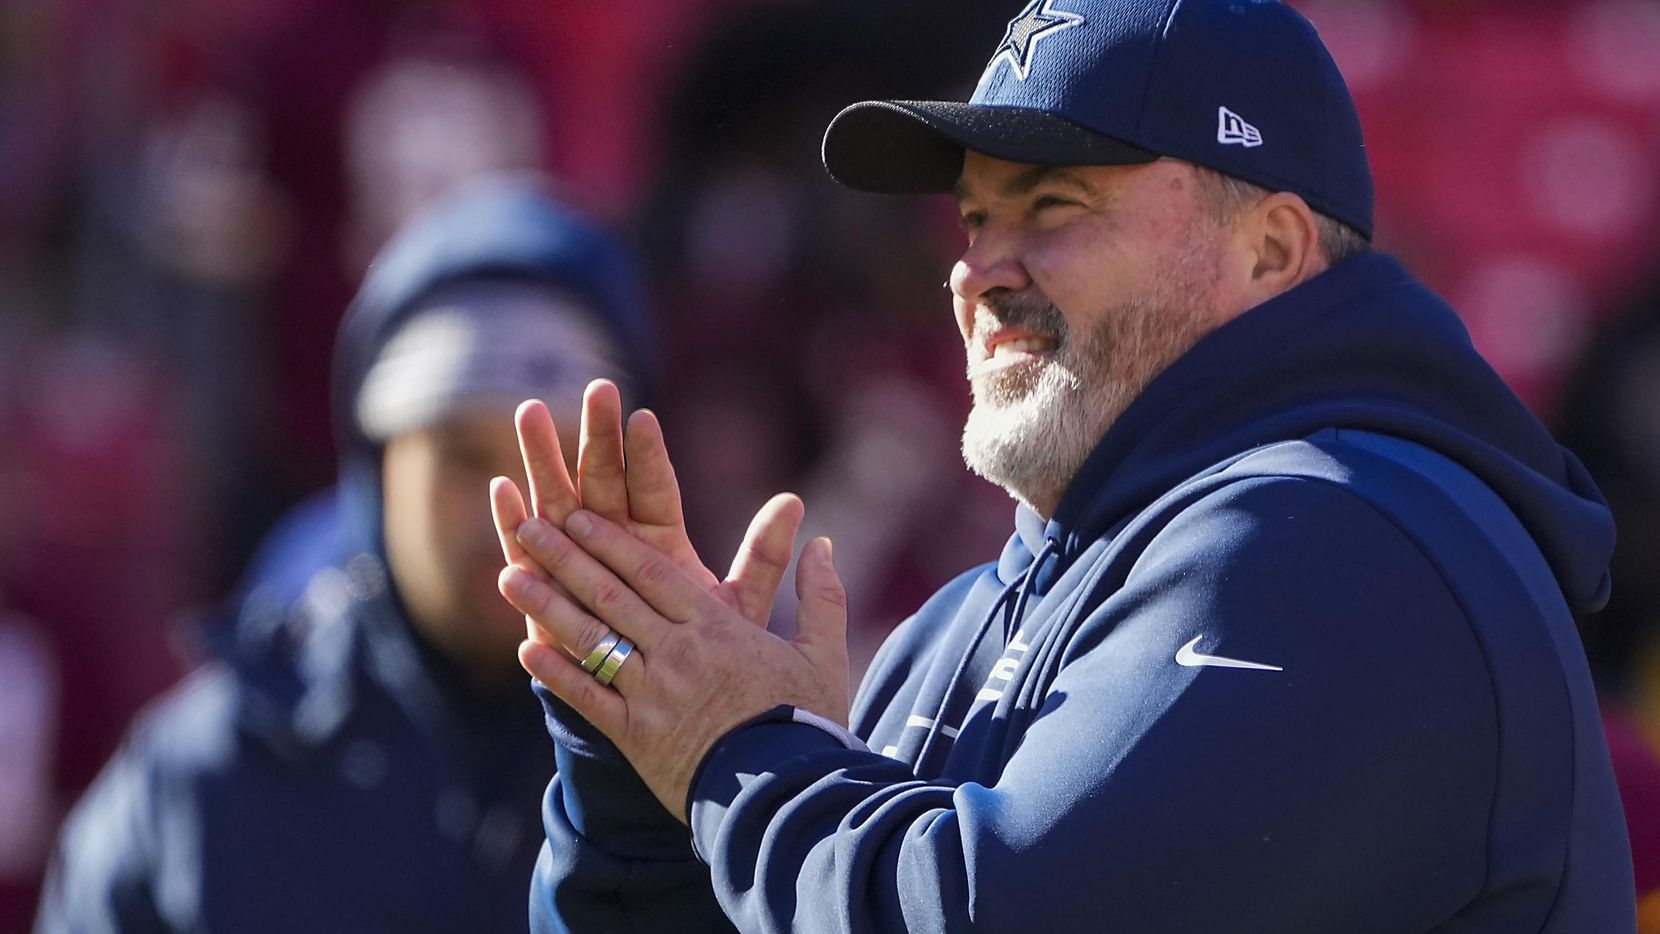 Dallas Cowboys head coach Mike McCarthy watches the teams warm up before an NFL football game against the Washington Football Team on Sunday, Dec. 12, 2021, in Landover, Md.